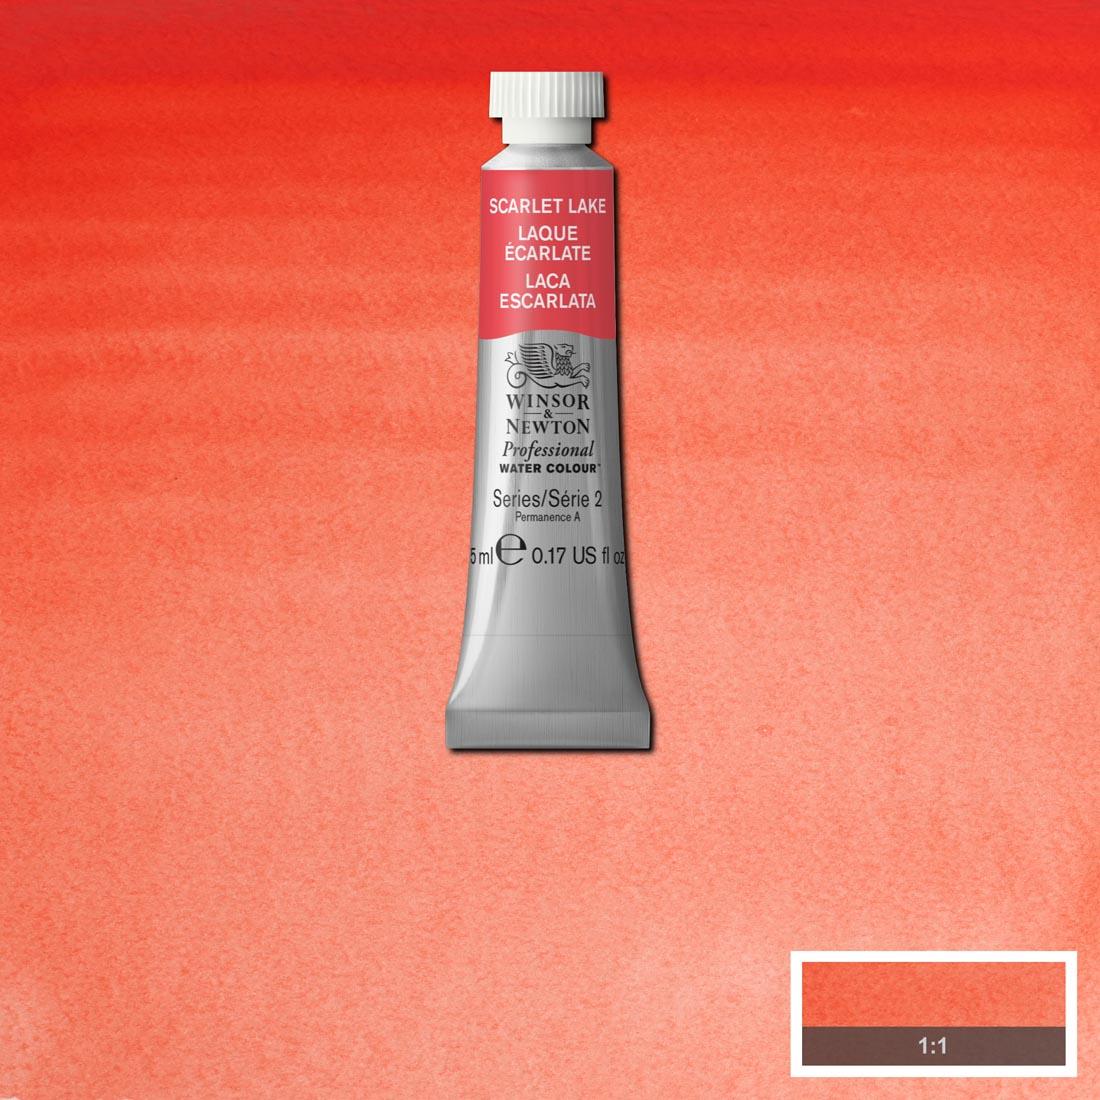 Tube of Scarlet Lake Winsor & Newton Professional Water Colour with a paint swatch for the background